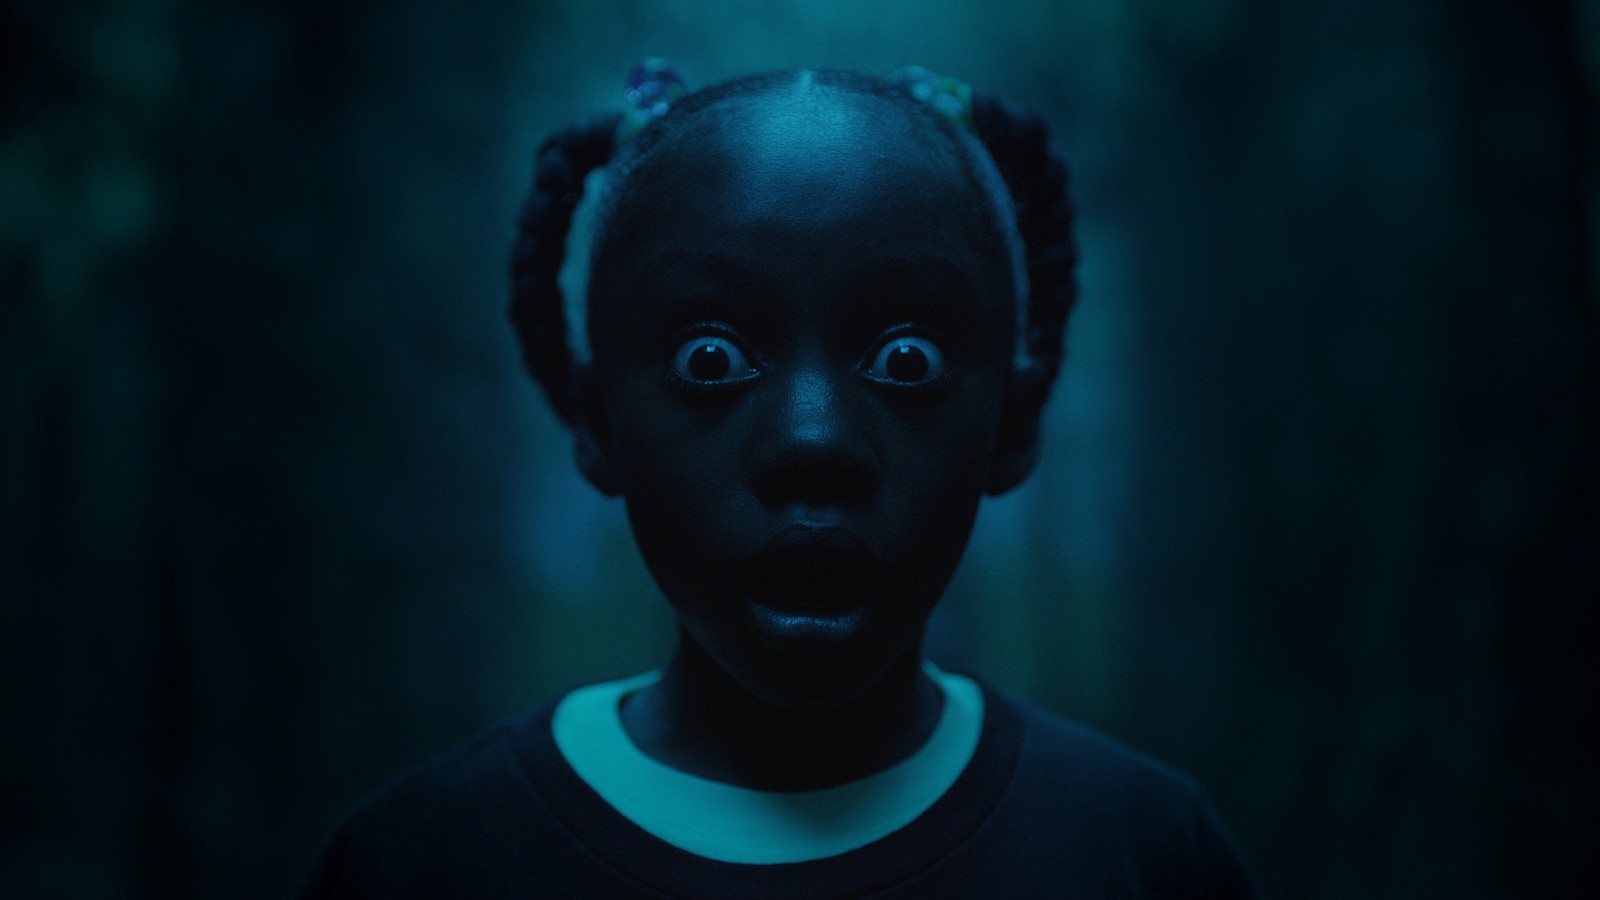 so Outdated Controversy Us' and Jordan Peele's Reinvention of Horror - The Atlantic